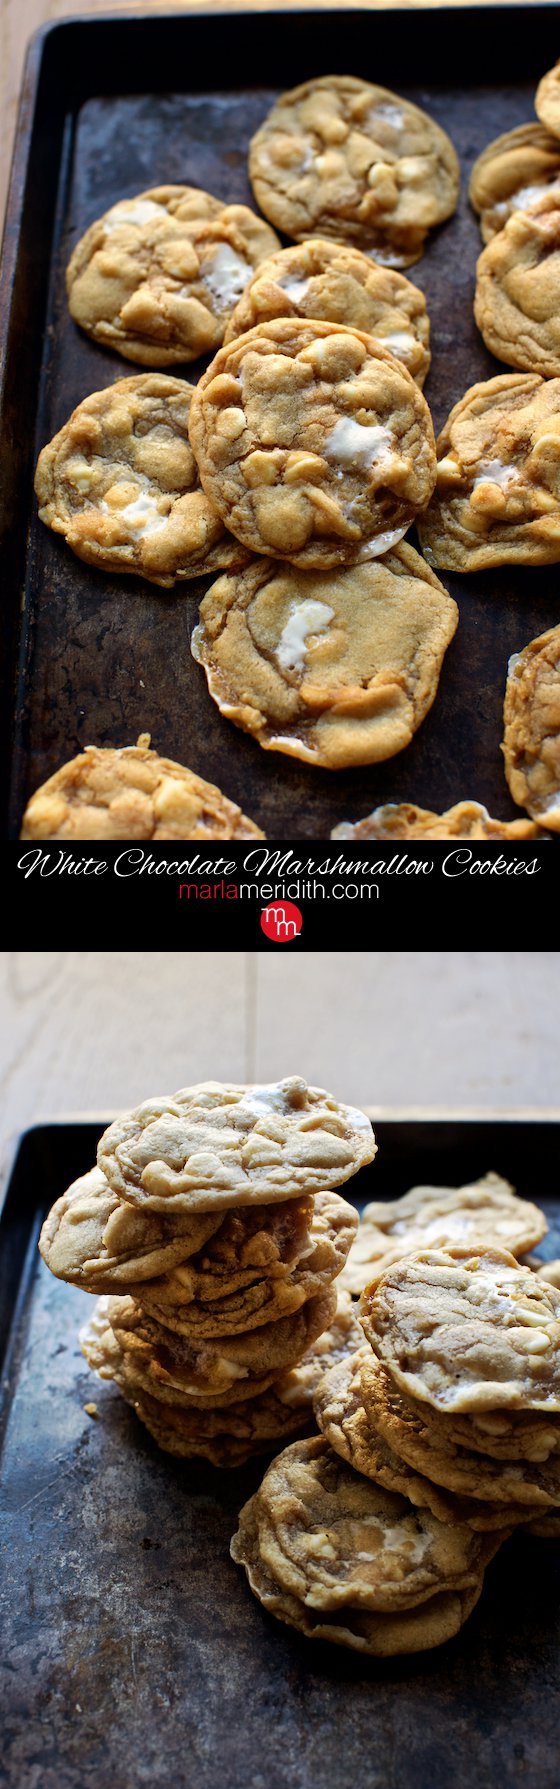 Mouthwatering! White Chocolate Marshmallow Cookies recipe, kids & adults will swoon over these chewy cookies! MarlaMeridith.com ( @marlameridith ) #holiday